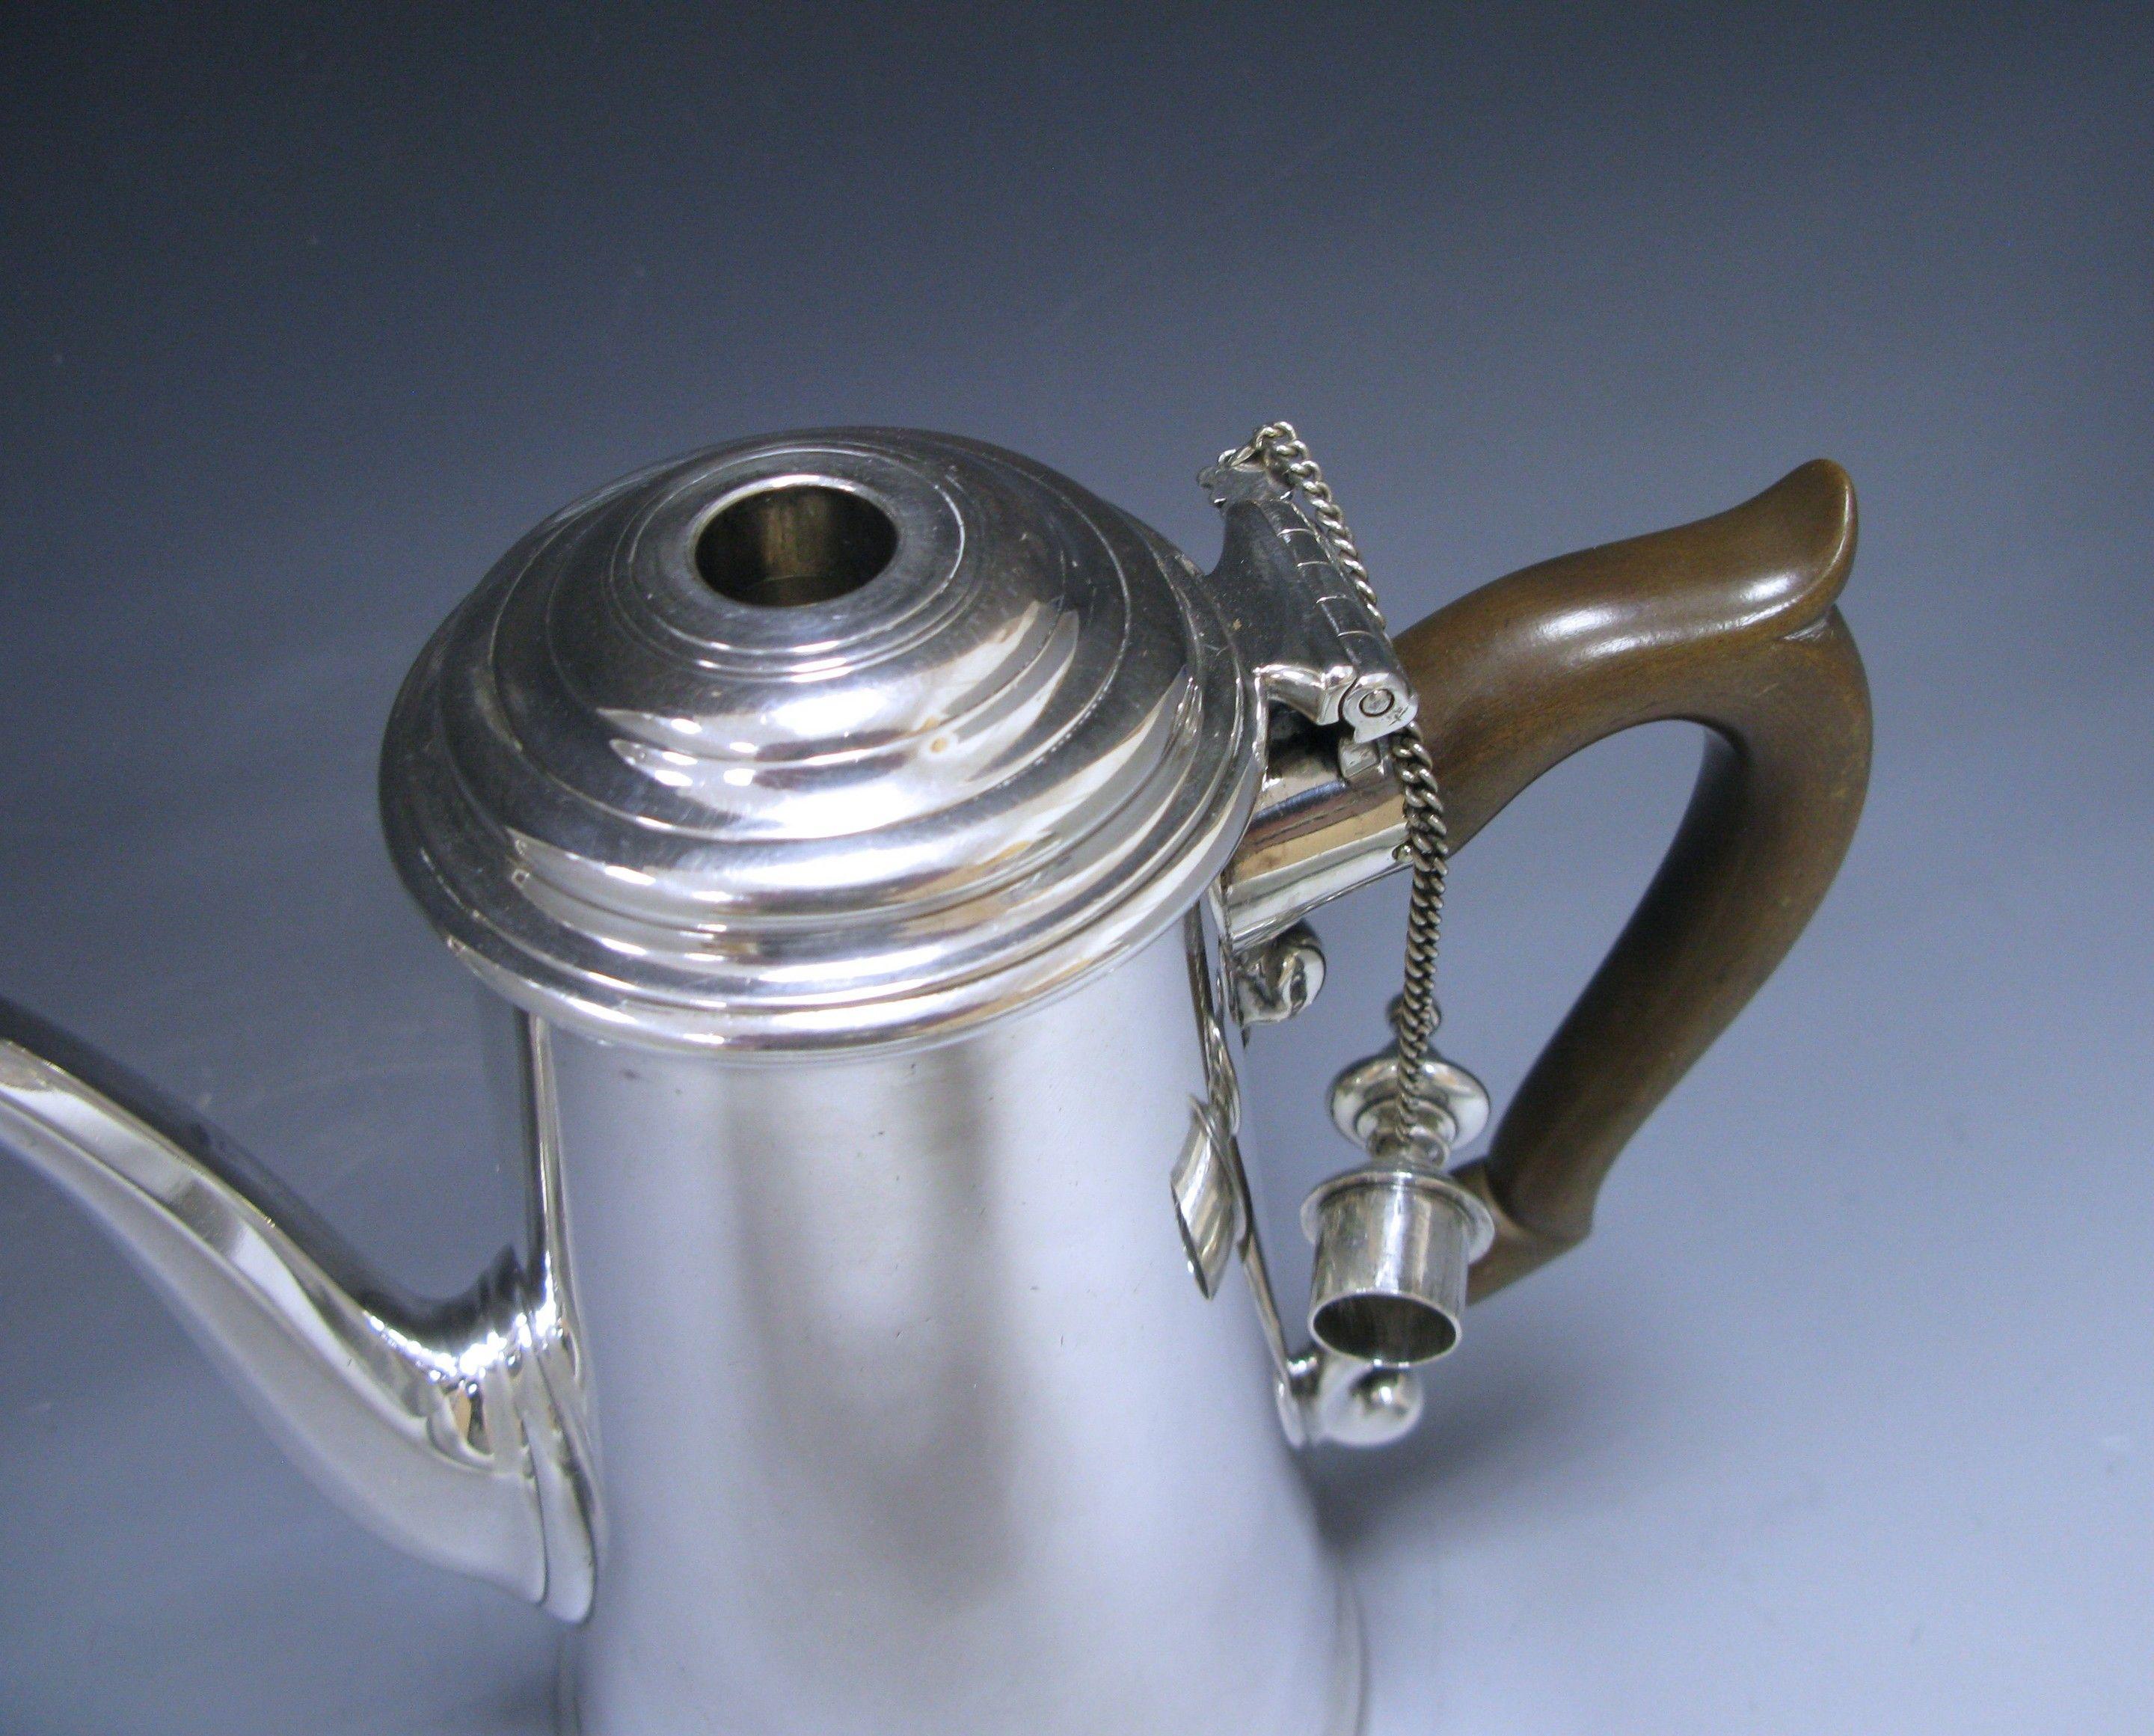 A superb antique silver George II chocolate pot with straight tapering sides and a simple wooden handle. The lid is detachable and is held in place by a pin and chain. The top finial is removable so that the chocolate can be stirred. To the front